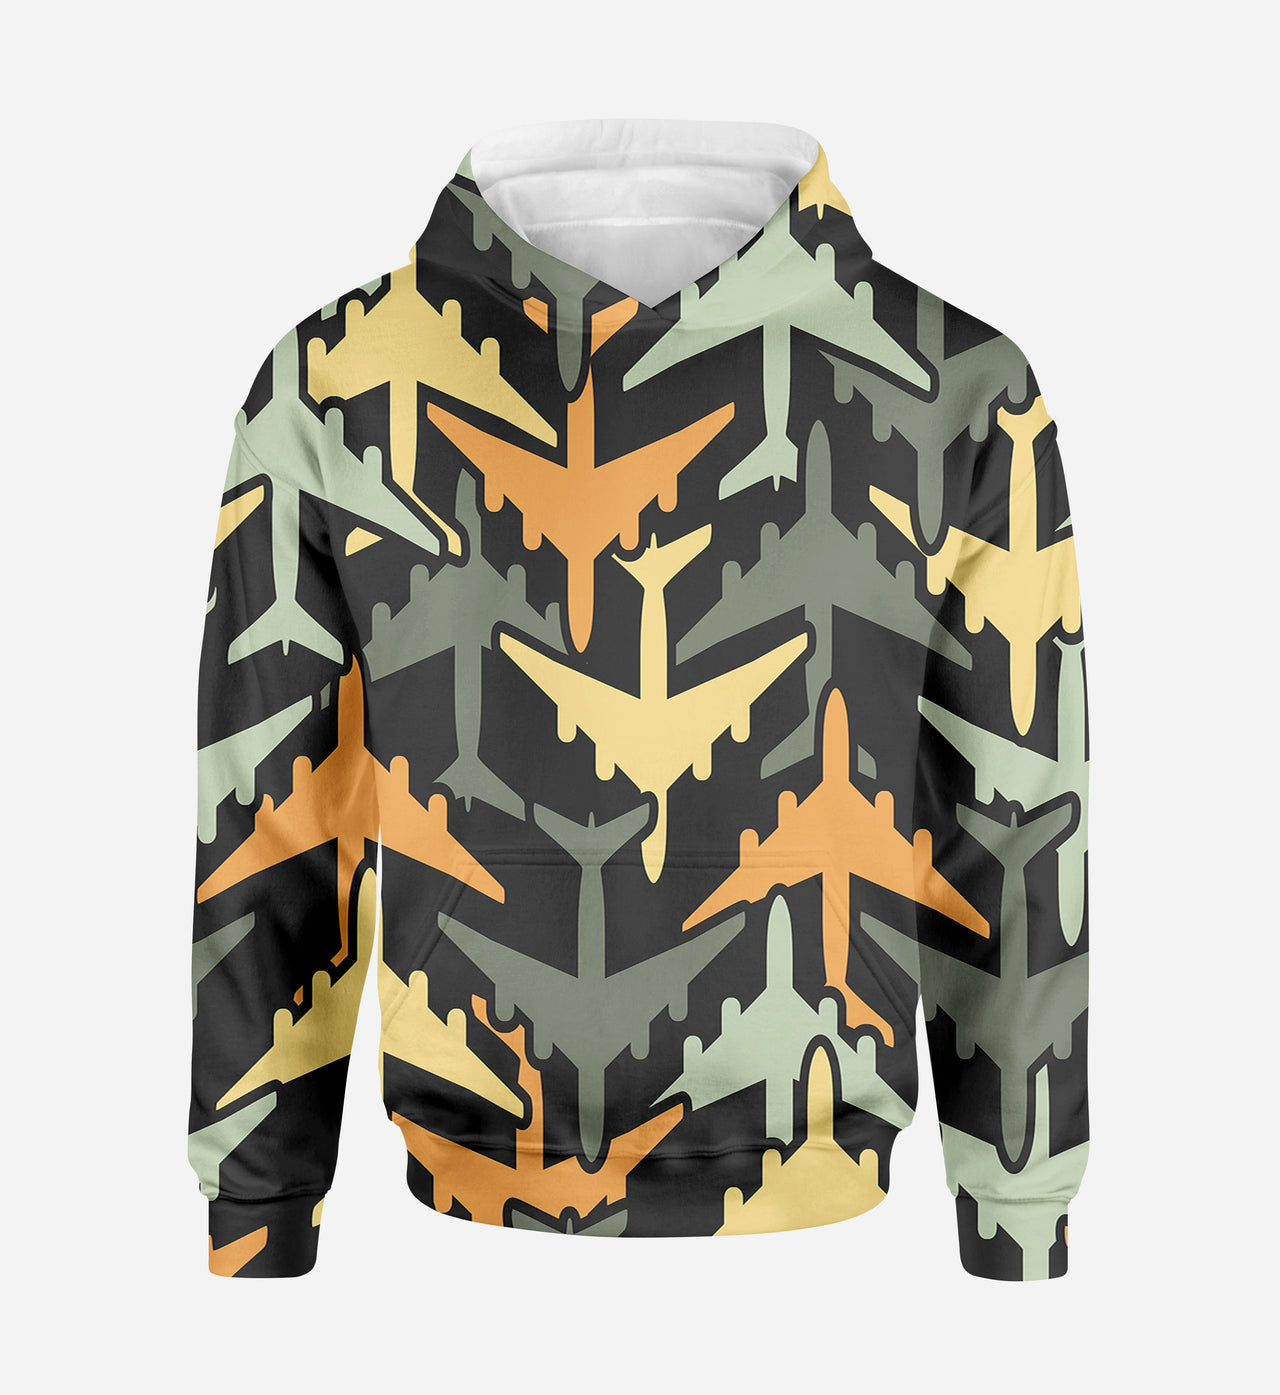 Volume 2 Super Colourful Airplanes Designed 3D Hoodies